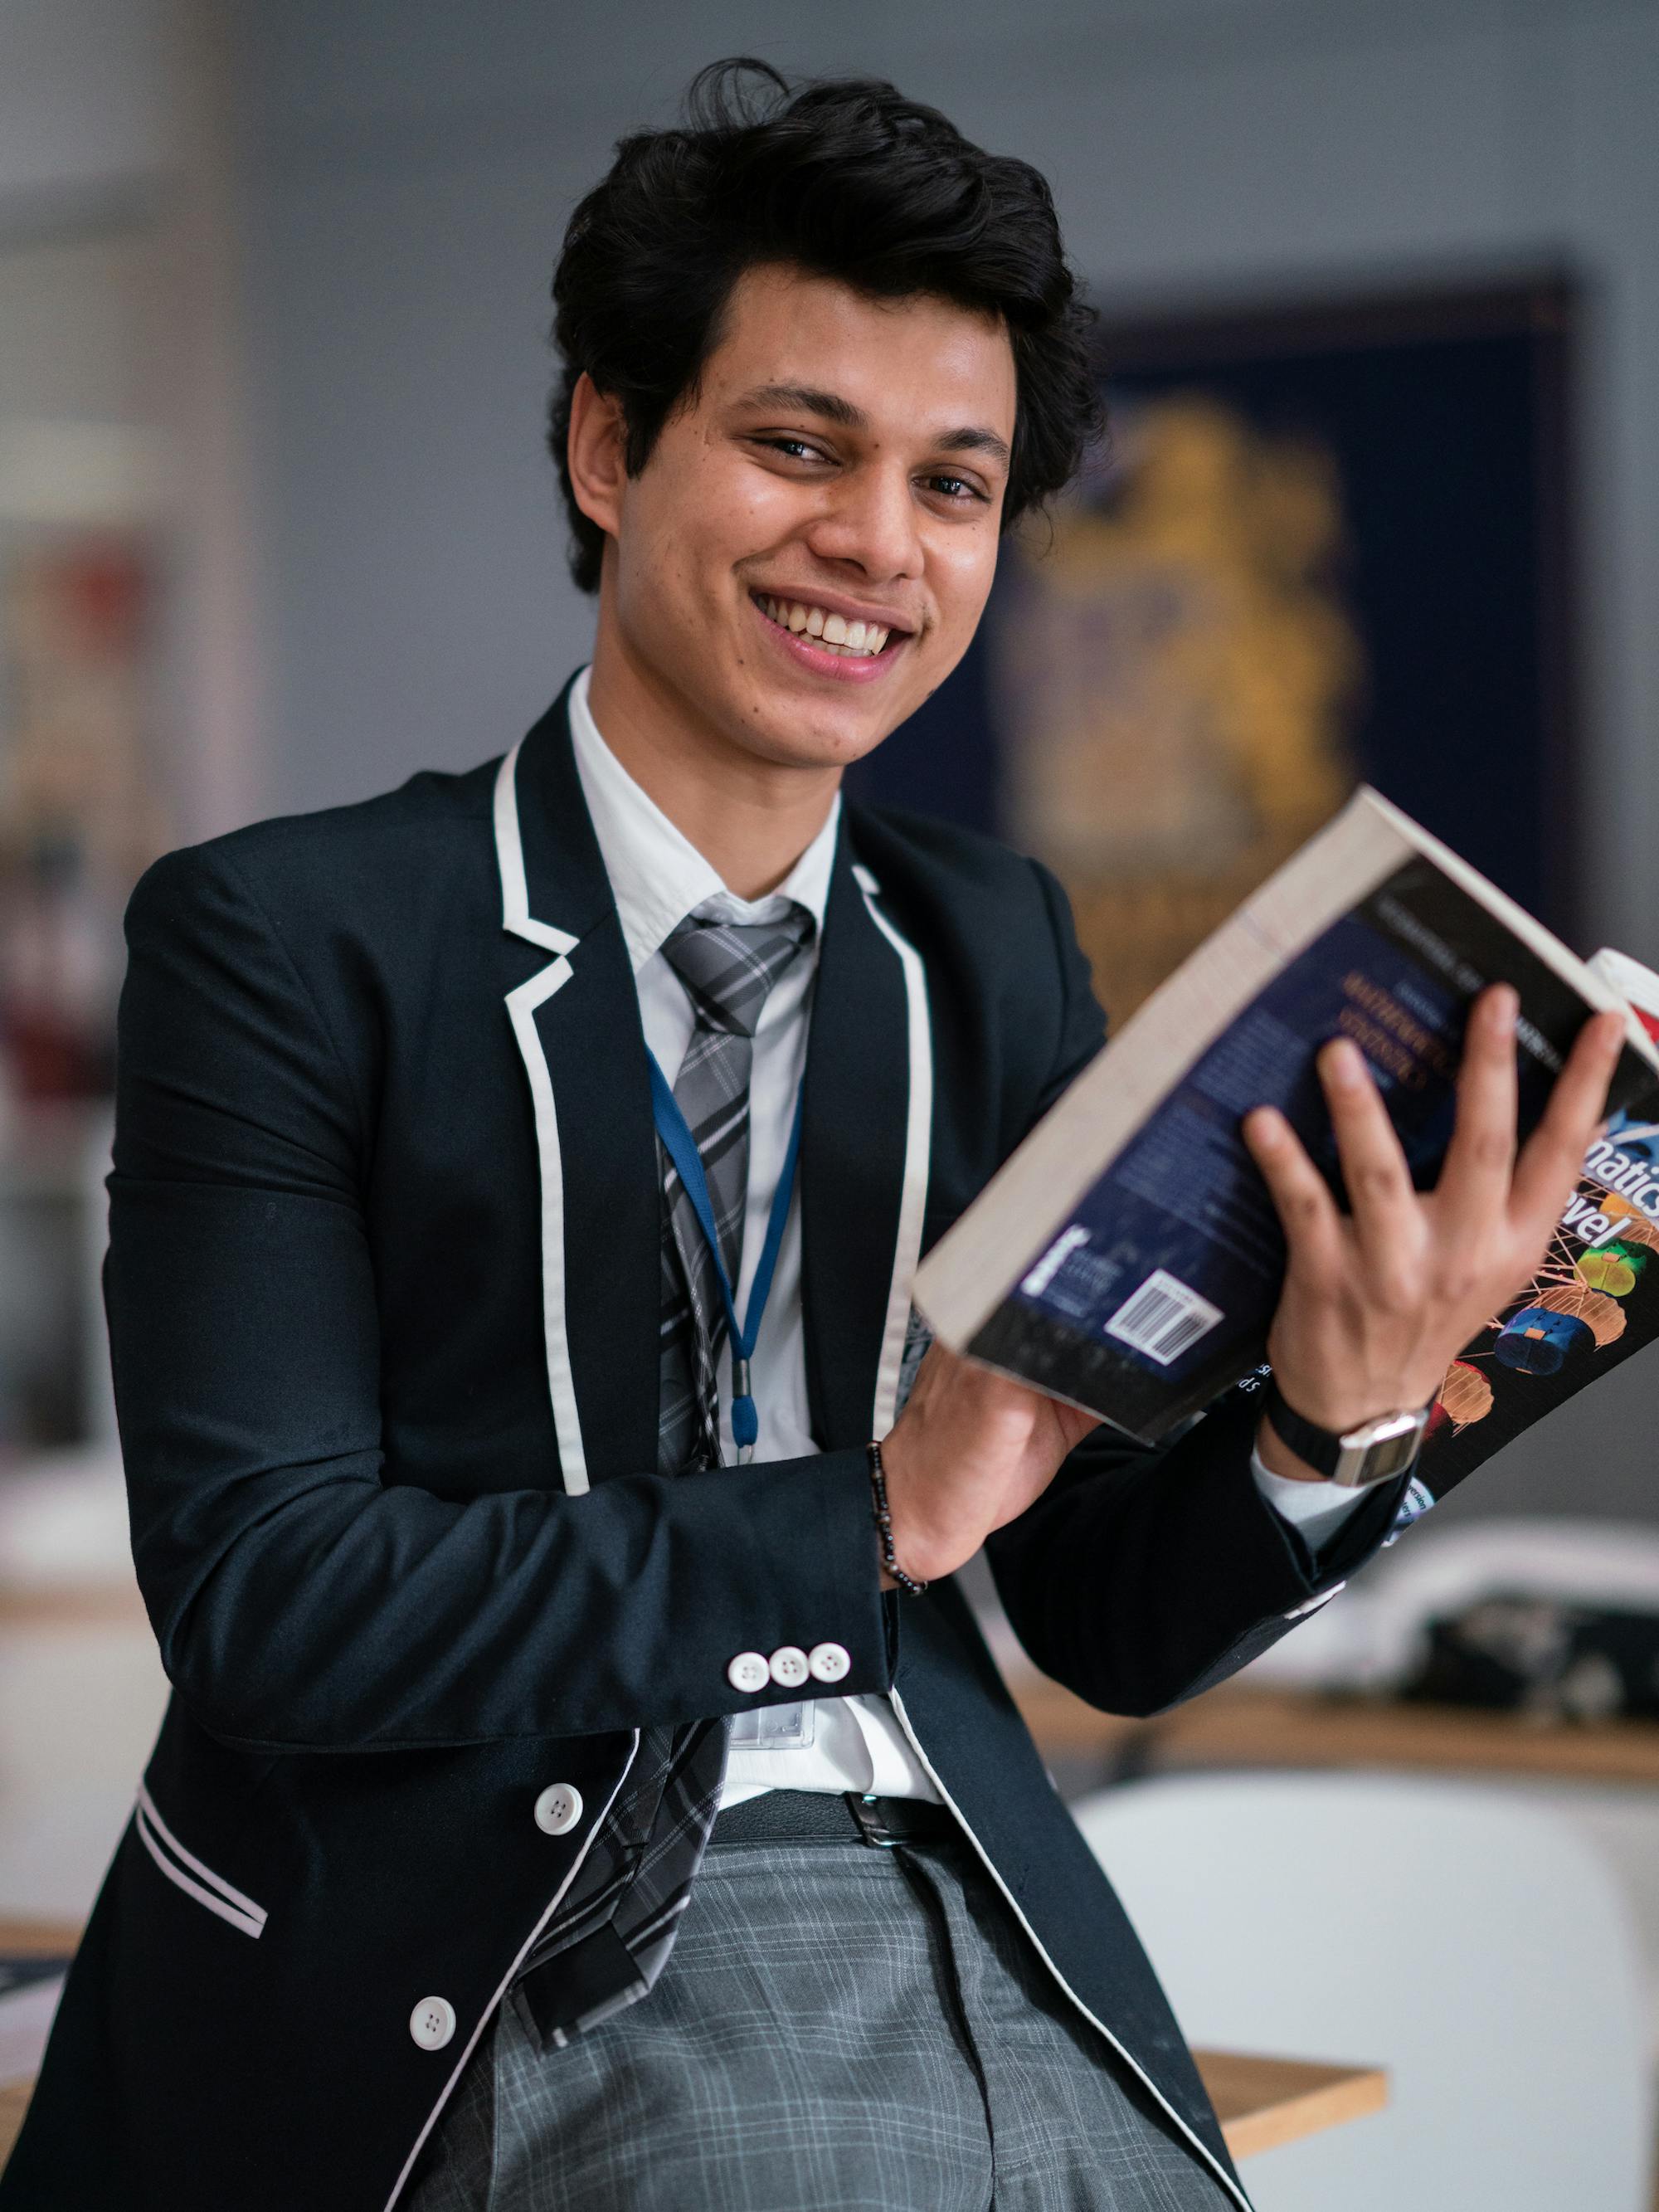 Actor Piyush Khati leans against a desk in a navy and gray school uniform, holding a book and smiling at the camera. 